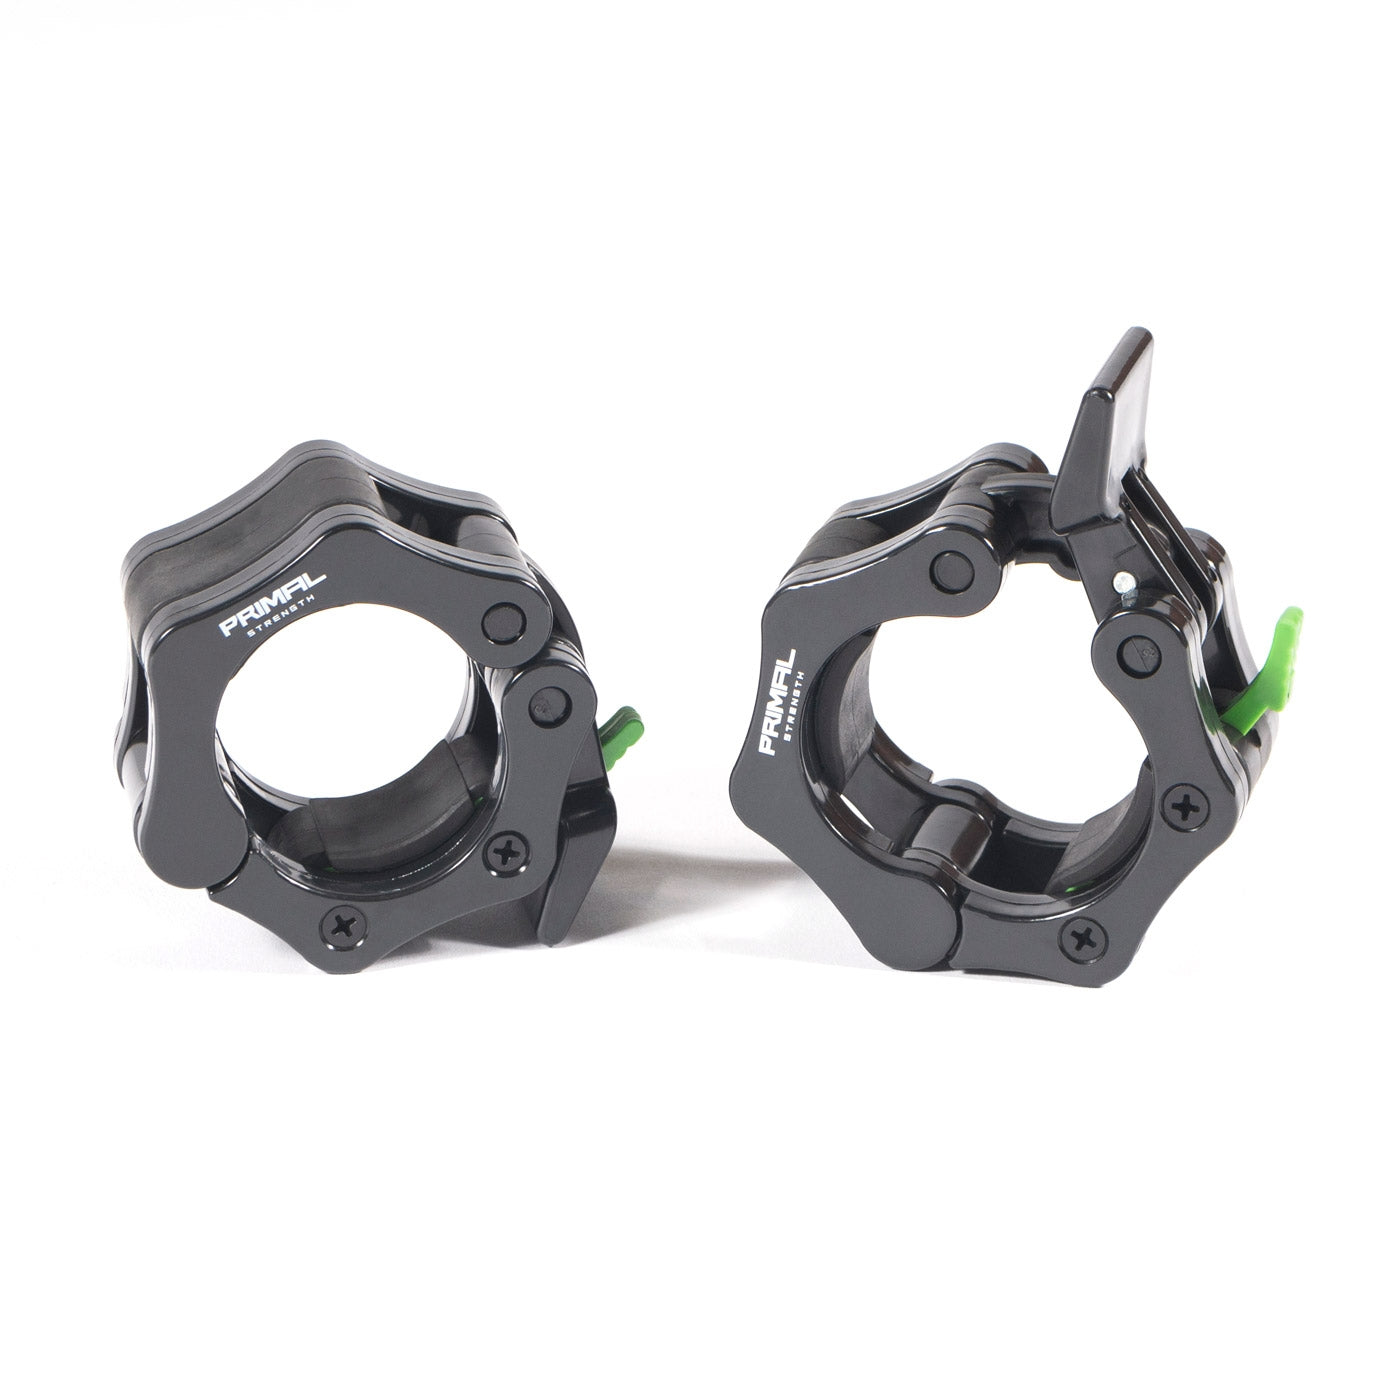 a pair of black quick release olympic barbell collars